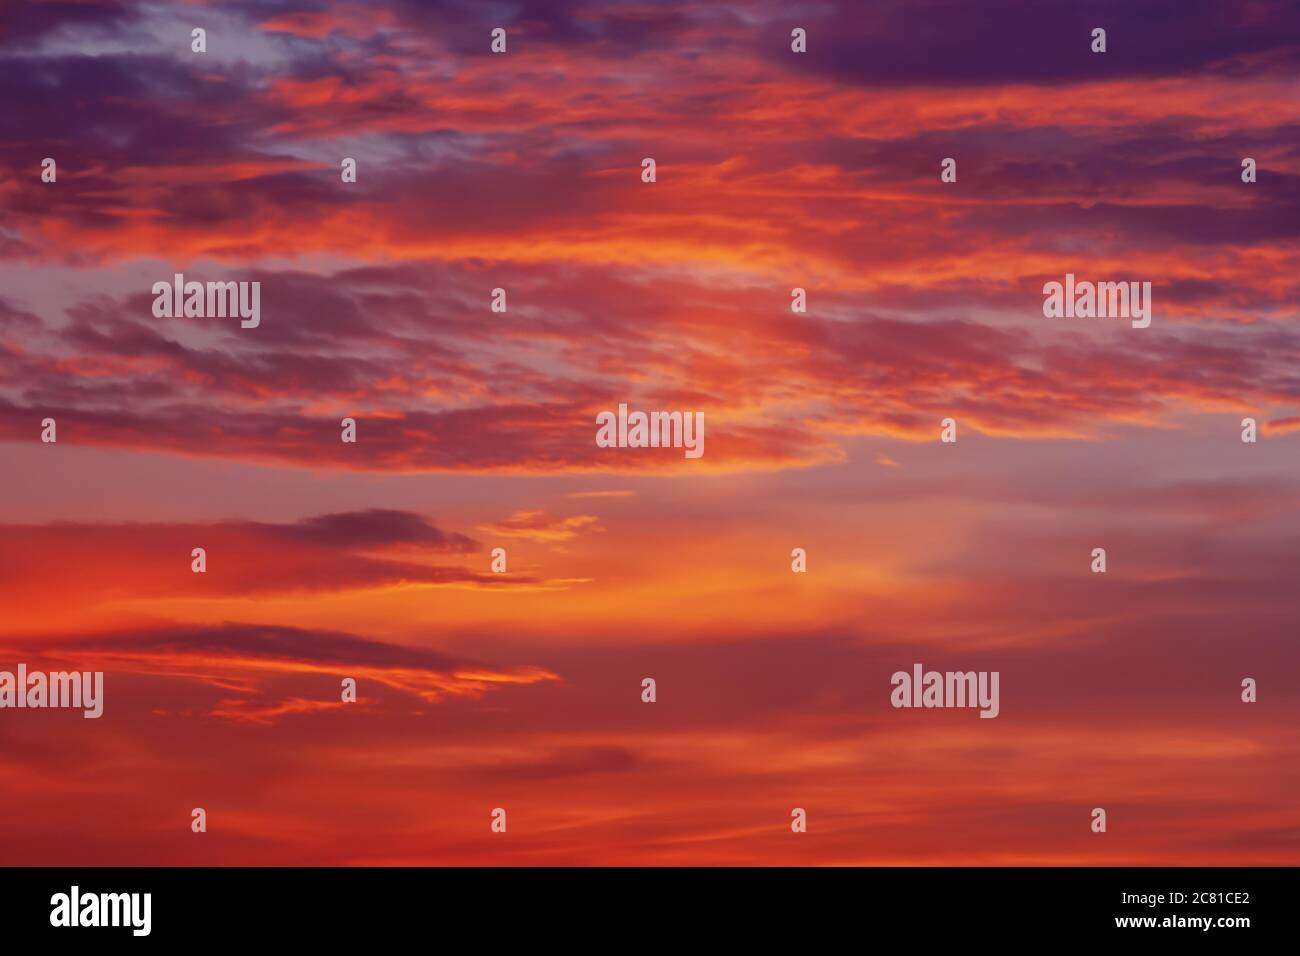 vibrant colorful background of red pink purple orange clouds in sunset sky, blurry dawn sky full frame texture Stock Photo